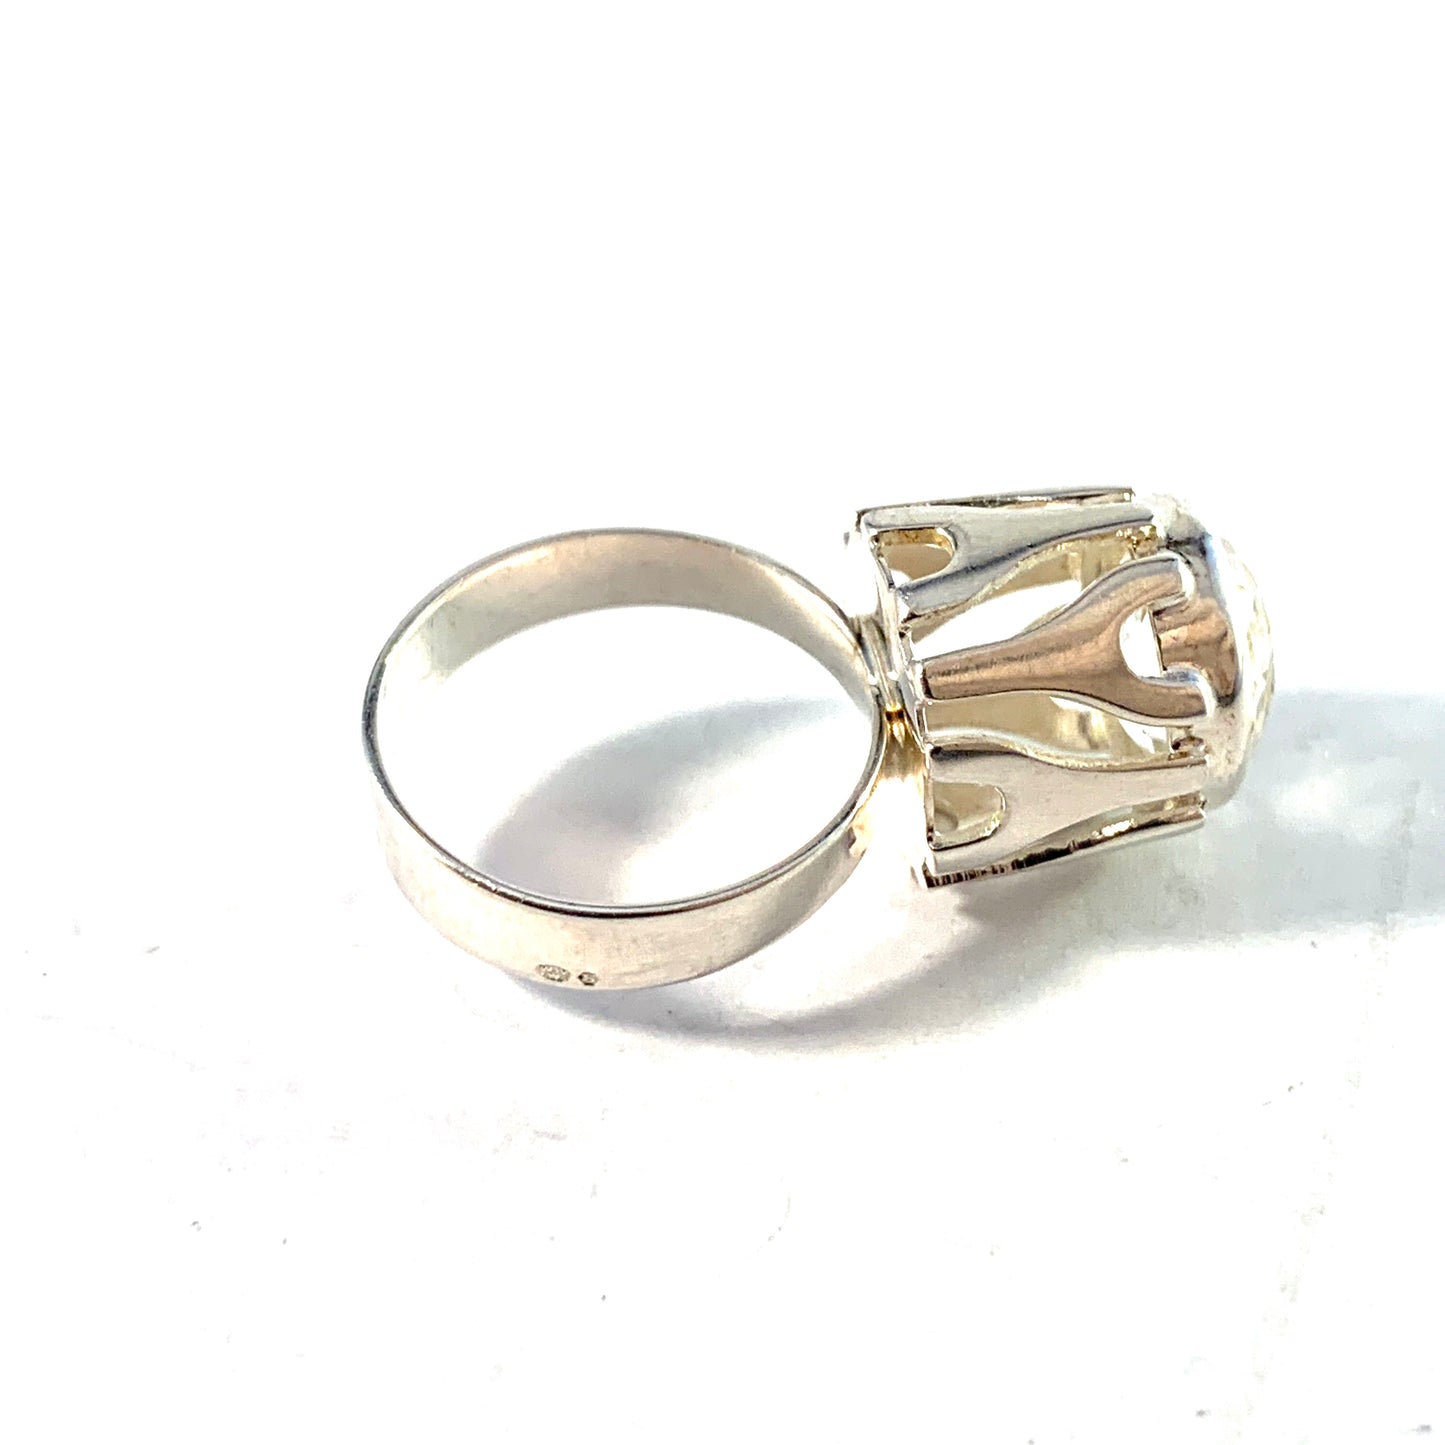 Germany c 1970s. Solid 835 Silver Rock Crystal Ring.